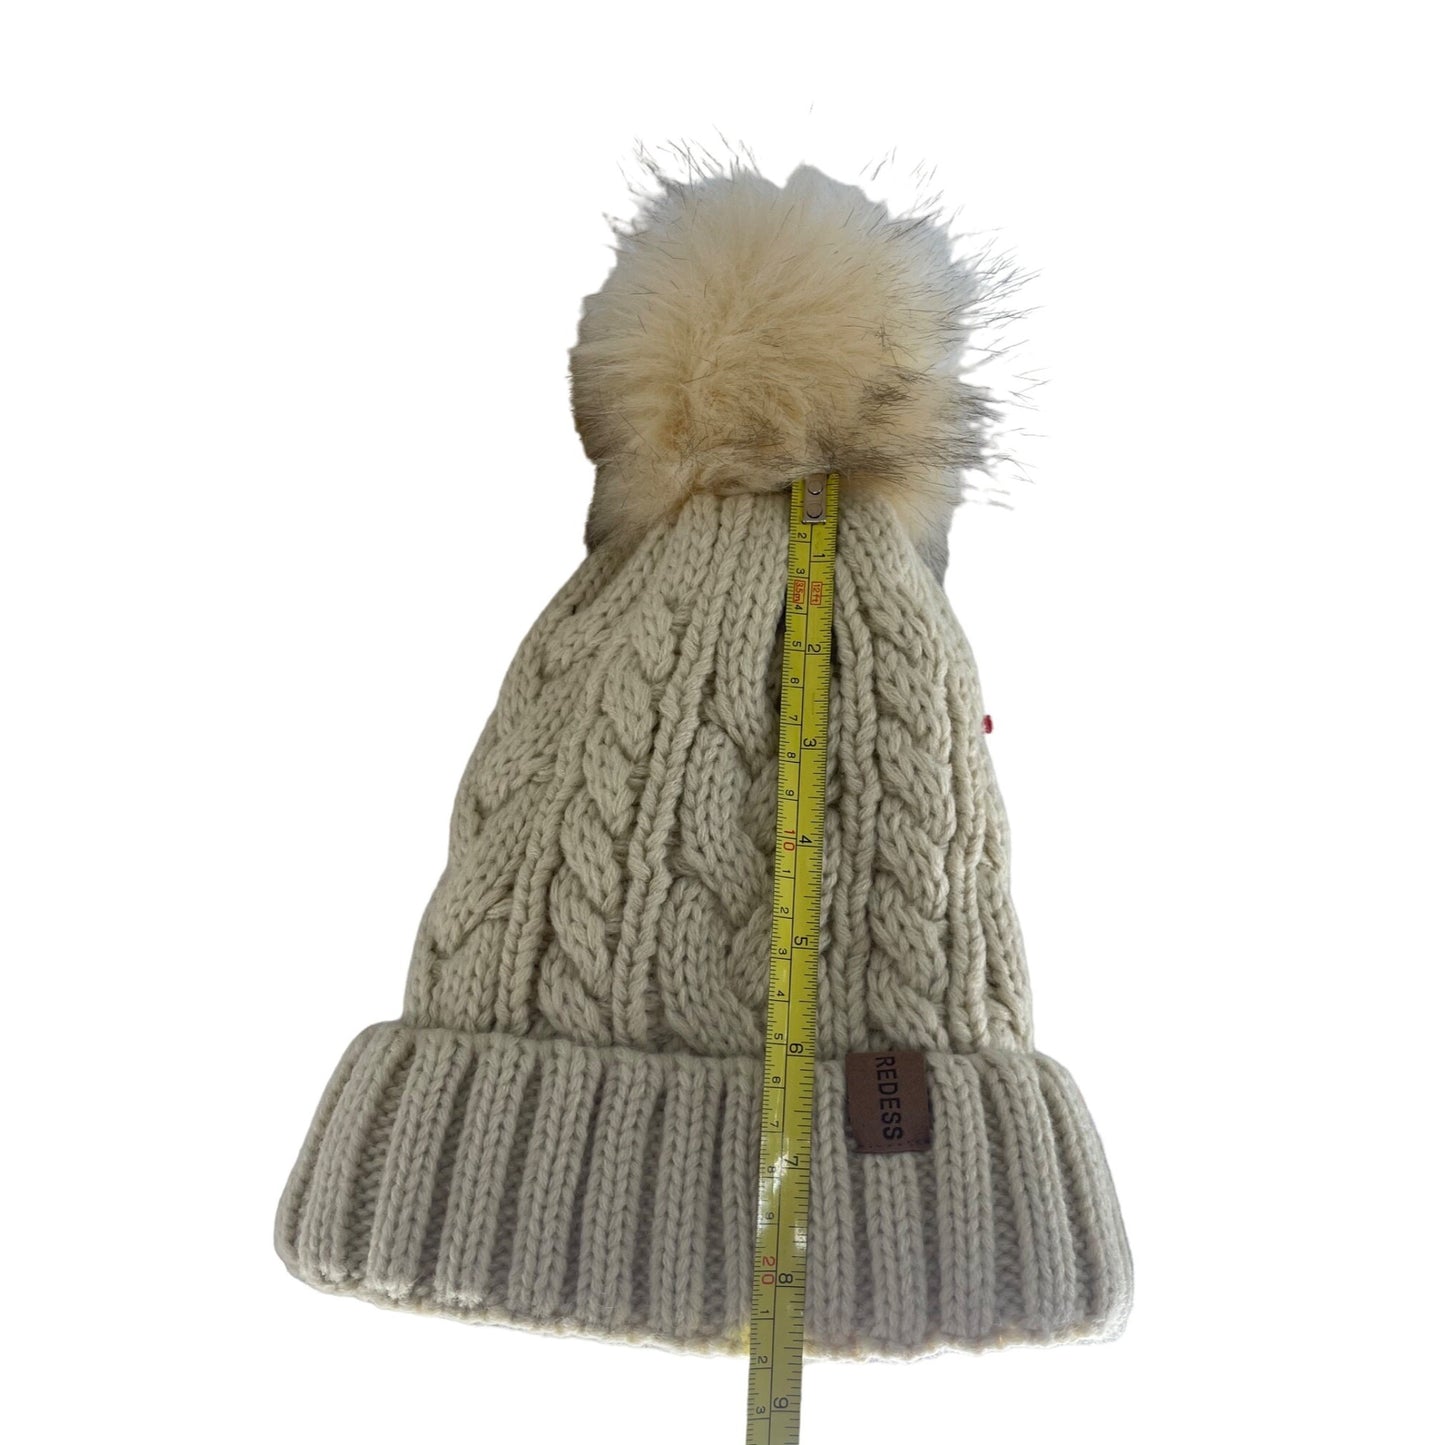 Redess Women's Size Small Cream Cable-Knit Faux Fur Pom Pom Beanie